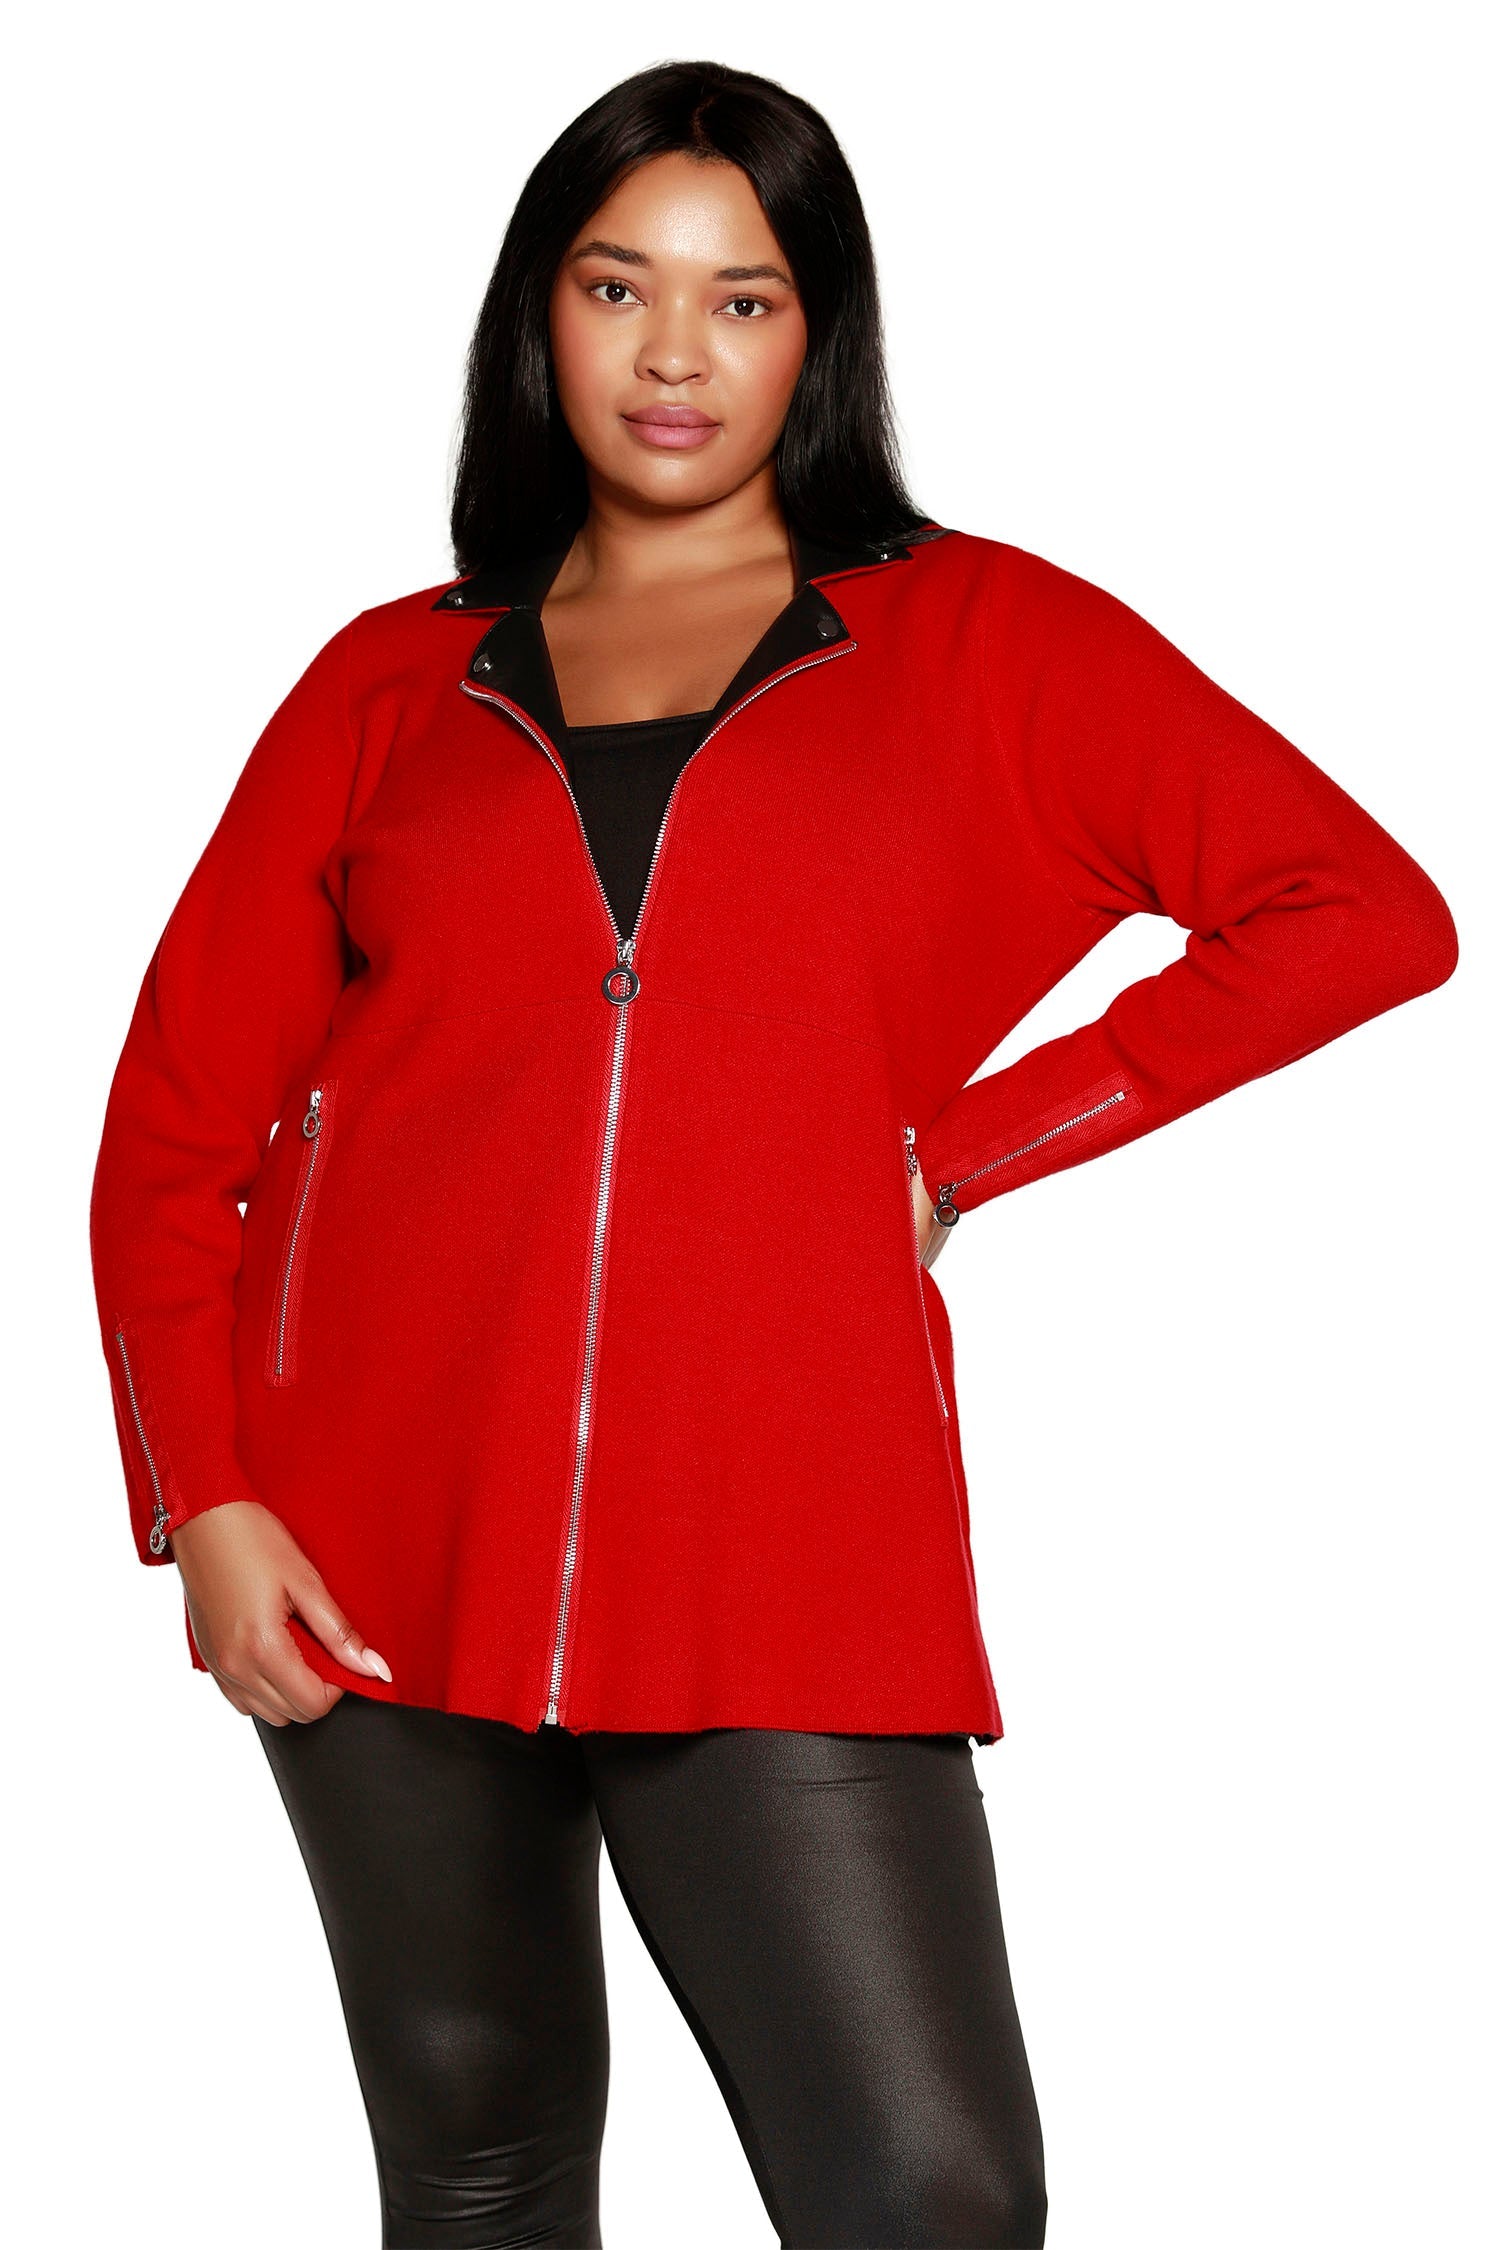 Women's Fit and Flare Jacket with Vegan Leather Trim and Pockets | Curvy